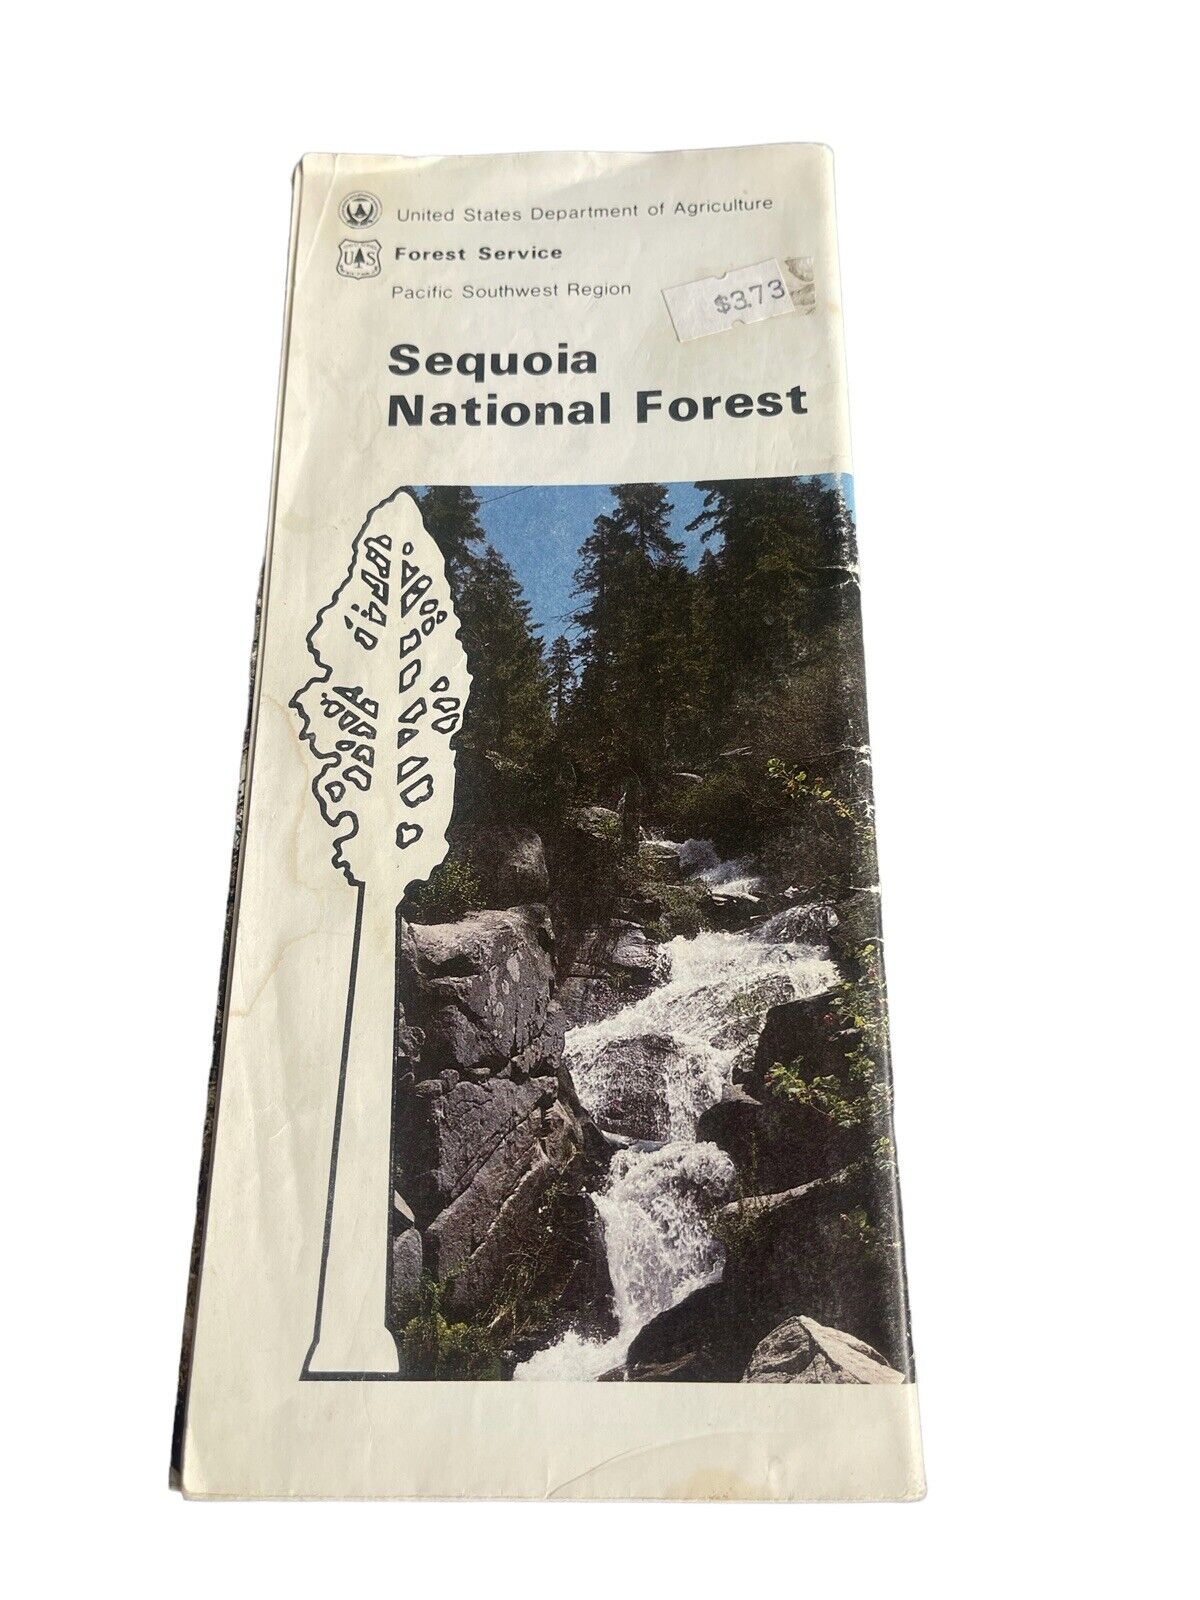 Vintage Sequoia National Forest Service Map US Dept of Agriculture 1981 Camping